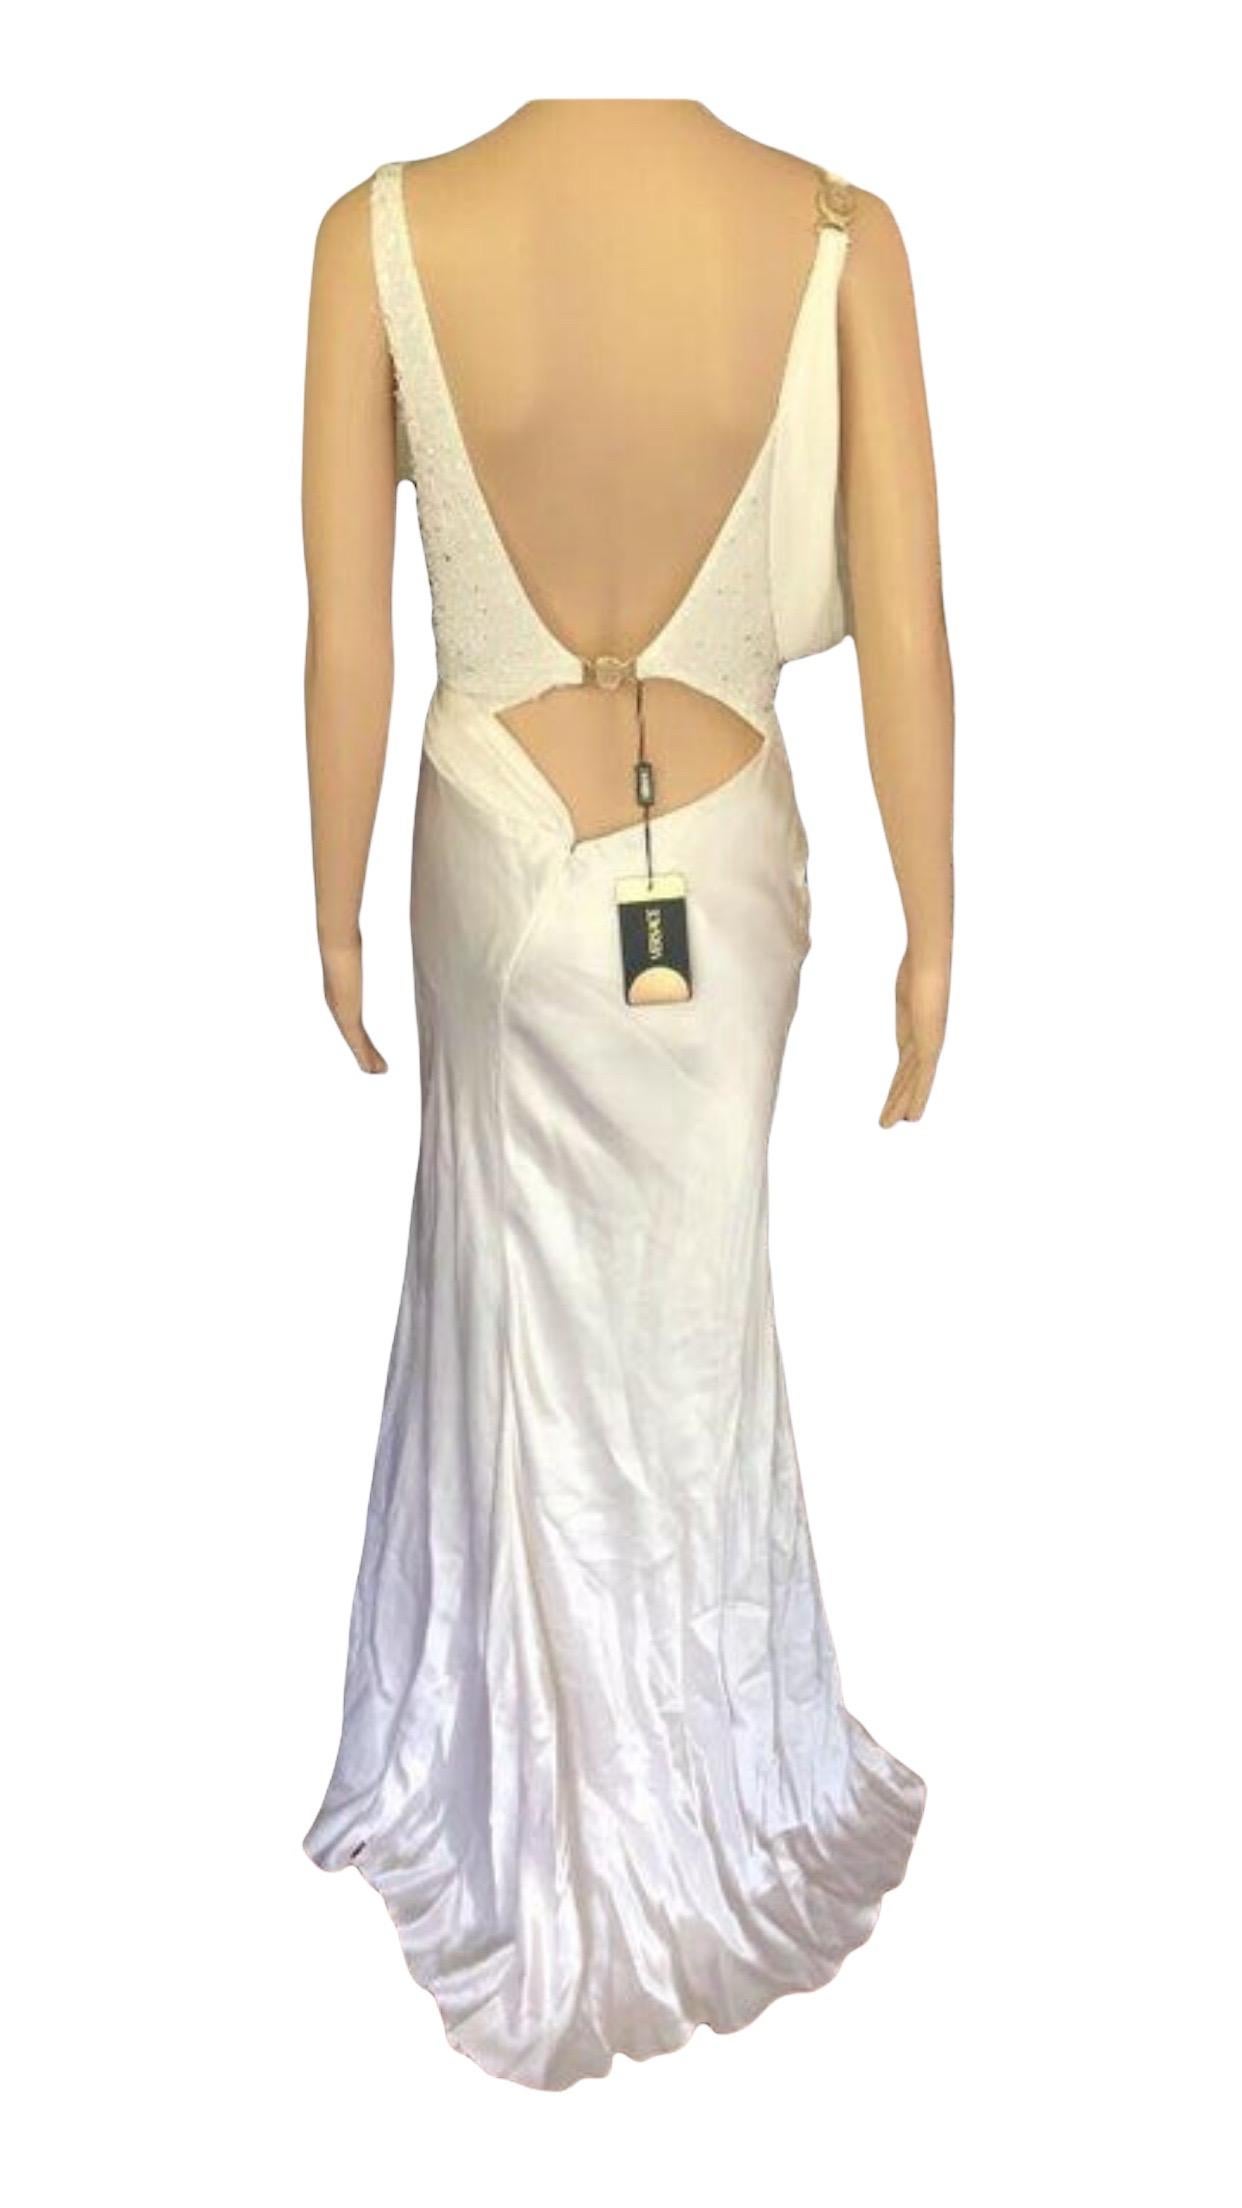 Versace S/S 2005 Embellished Cutout Back Ivory Dress Gown 2